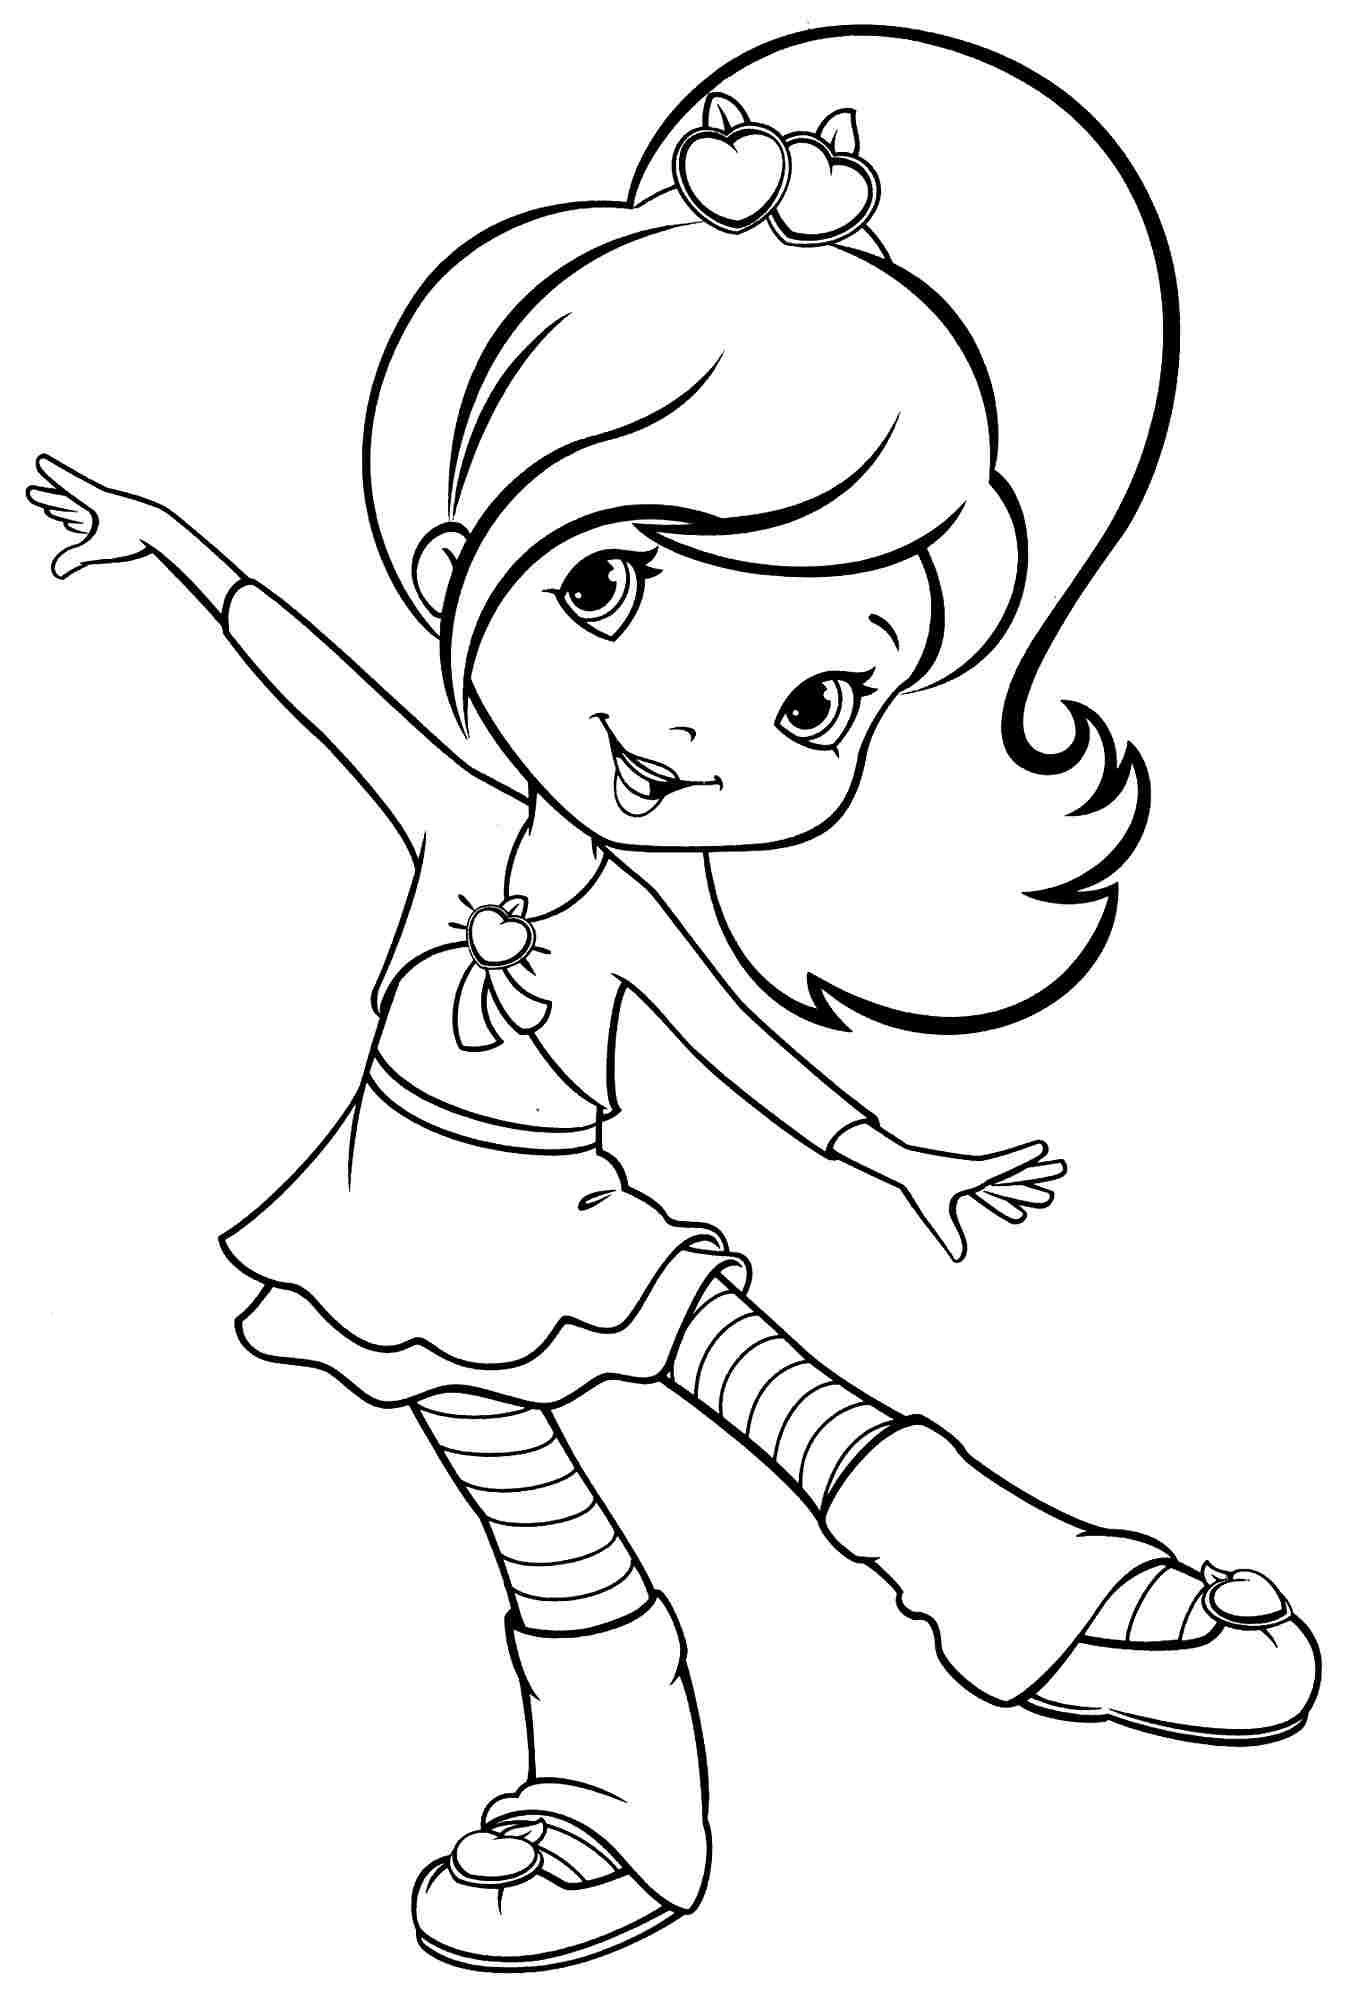 Coloring Sheets For Girls To Print Out
 Coloring Pages for Girls Best Coloring Pages For Kids